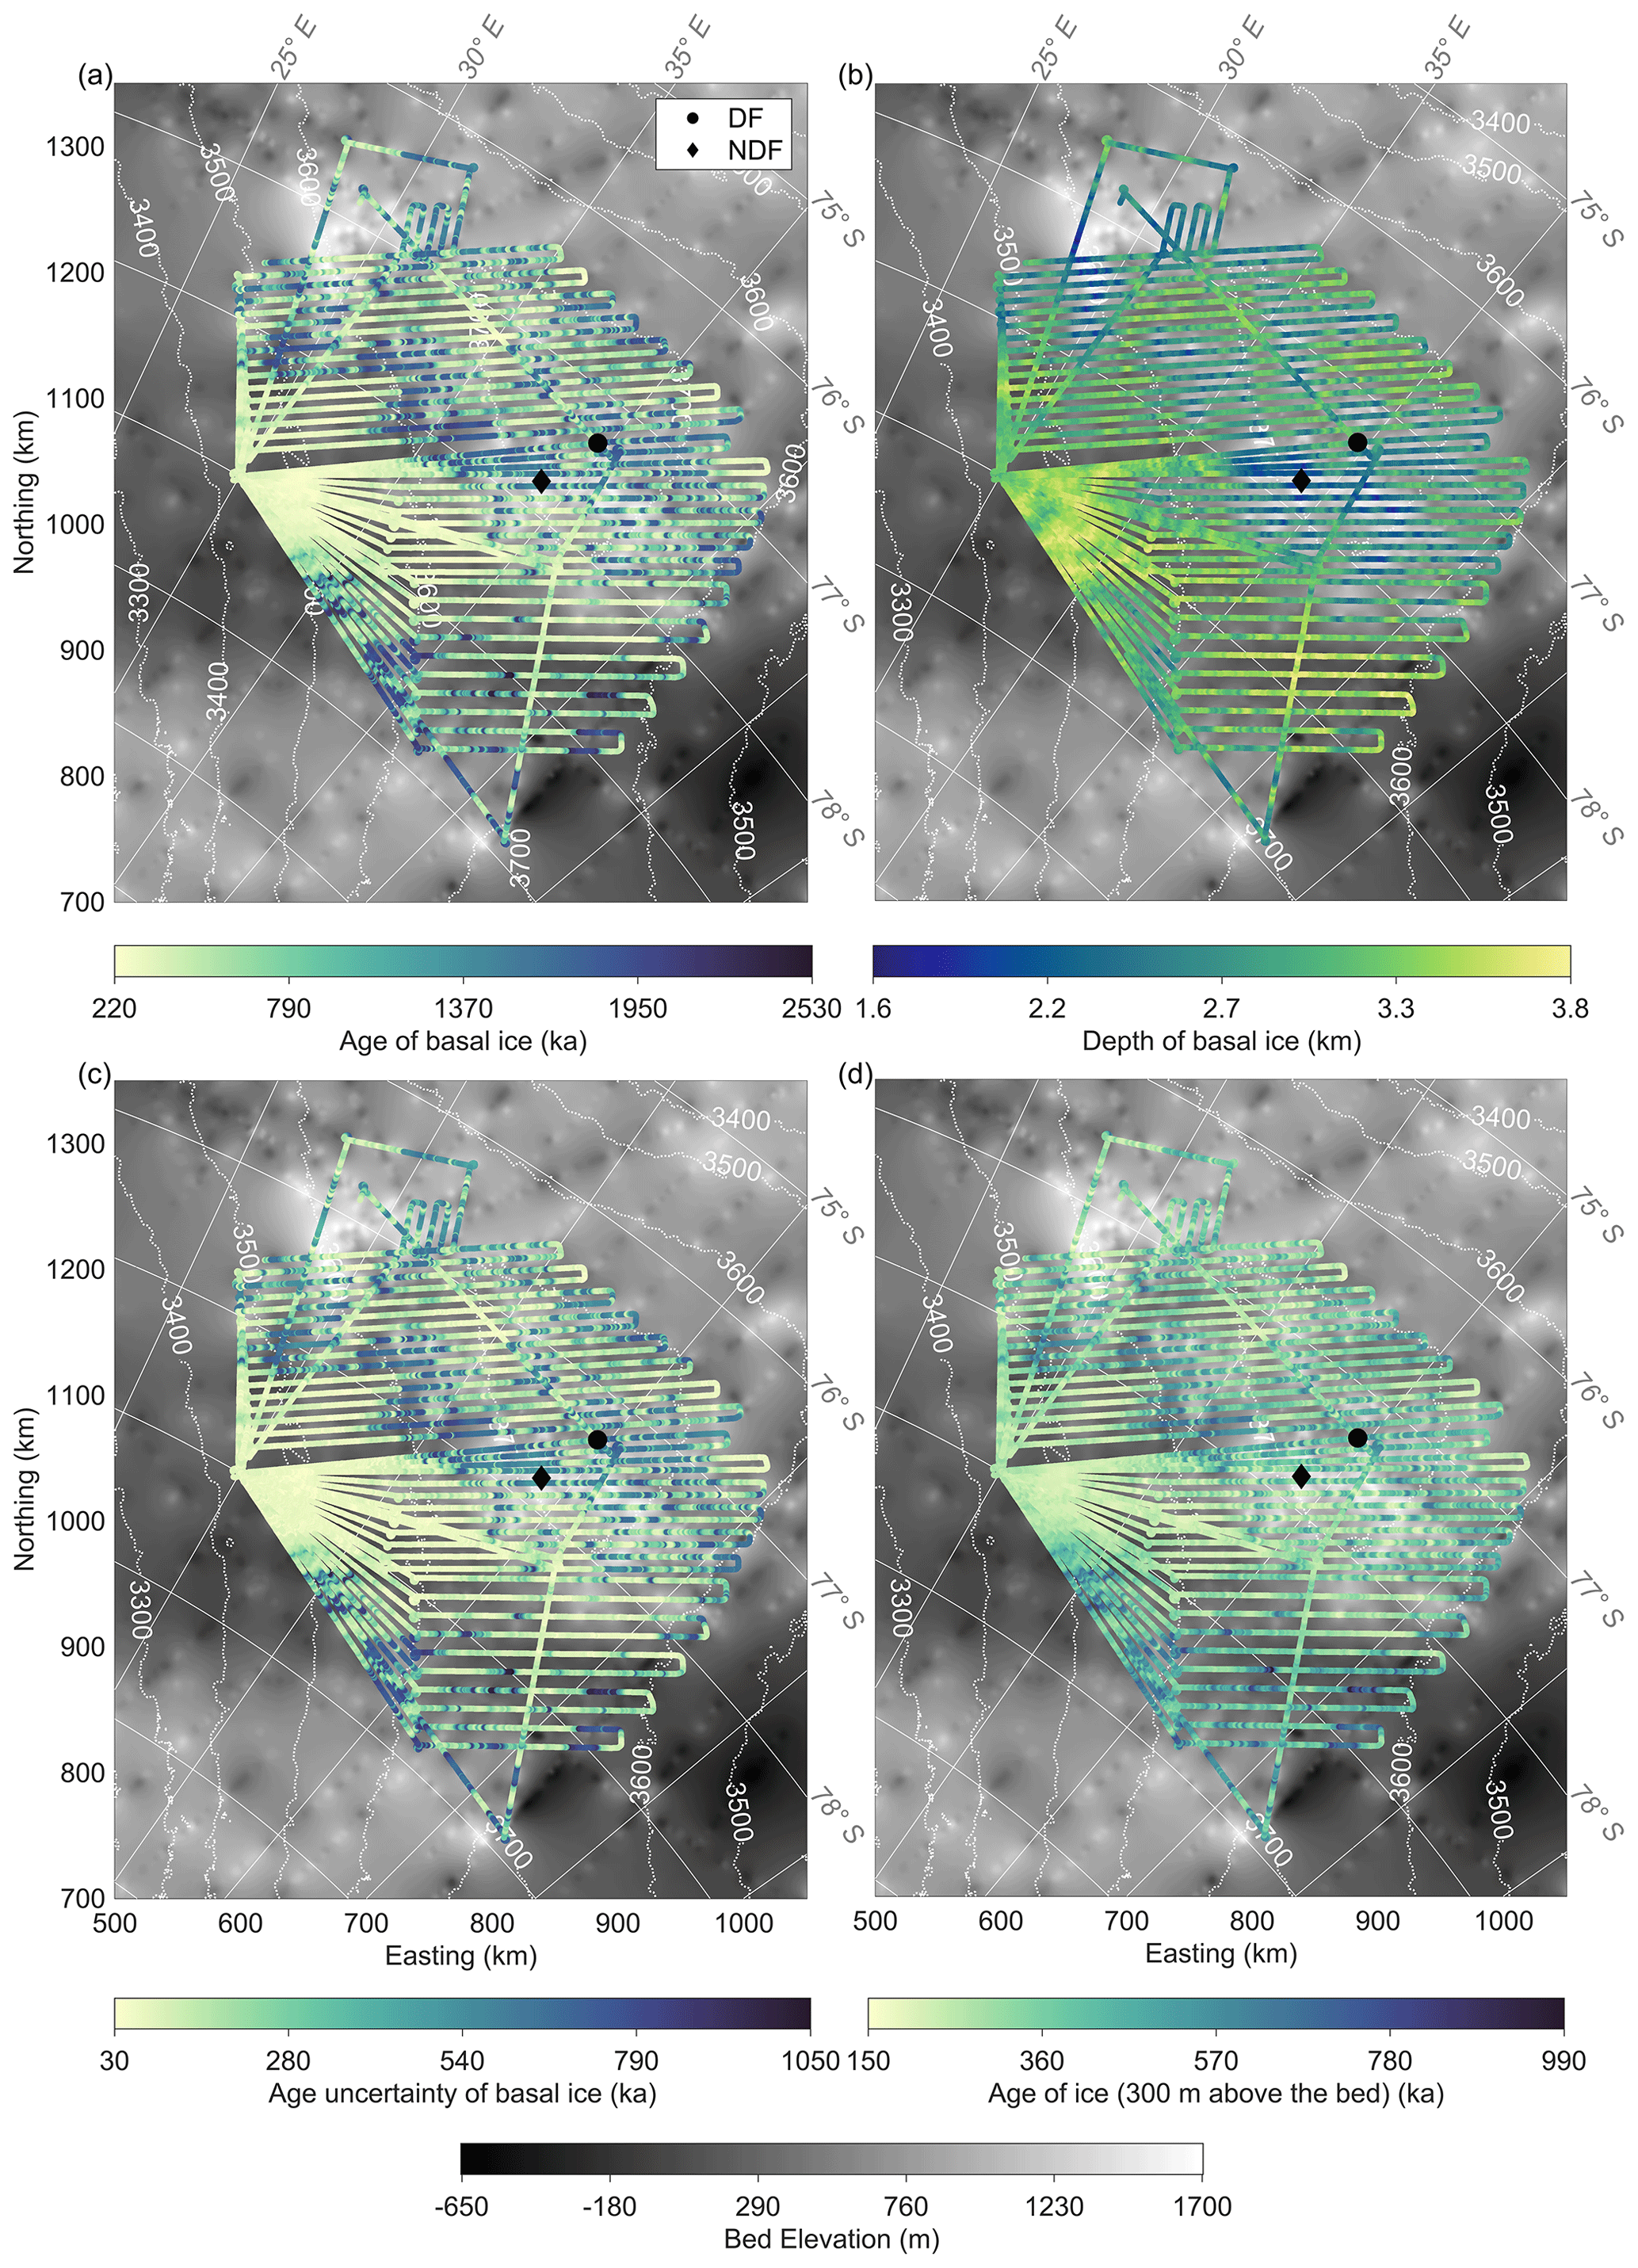 modeling in internal layer combining flow stratigraphy and Dome Antarctica, the - radar by basal ice and Fuji TC age conditions of Mapping region,